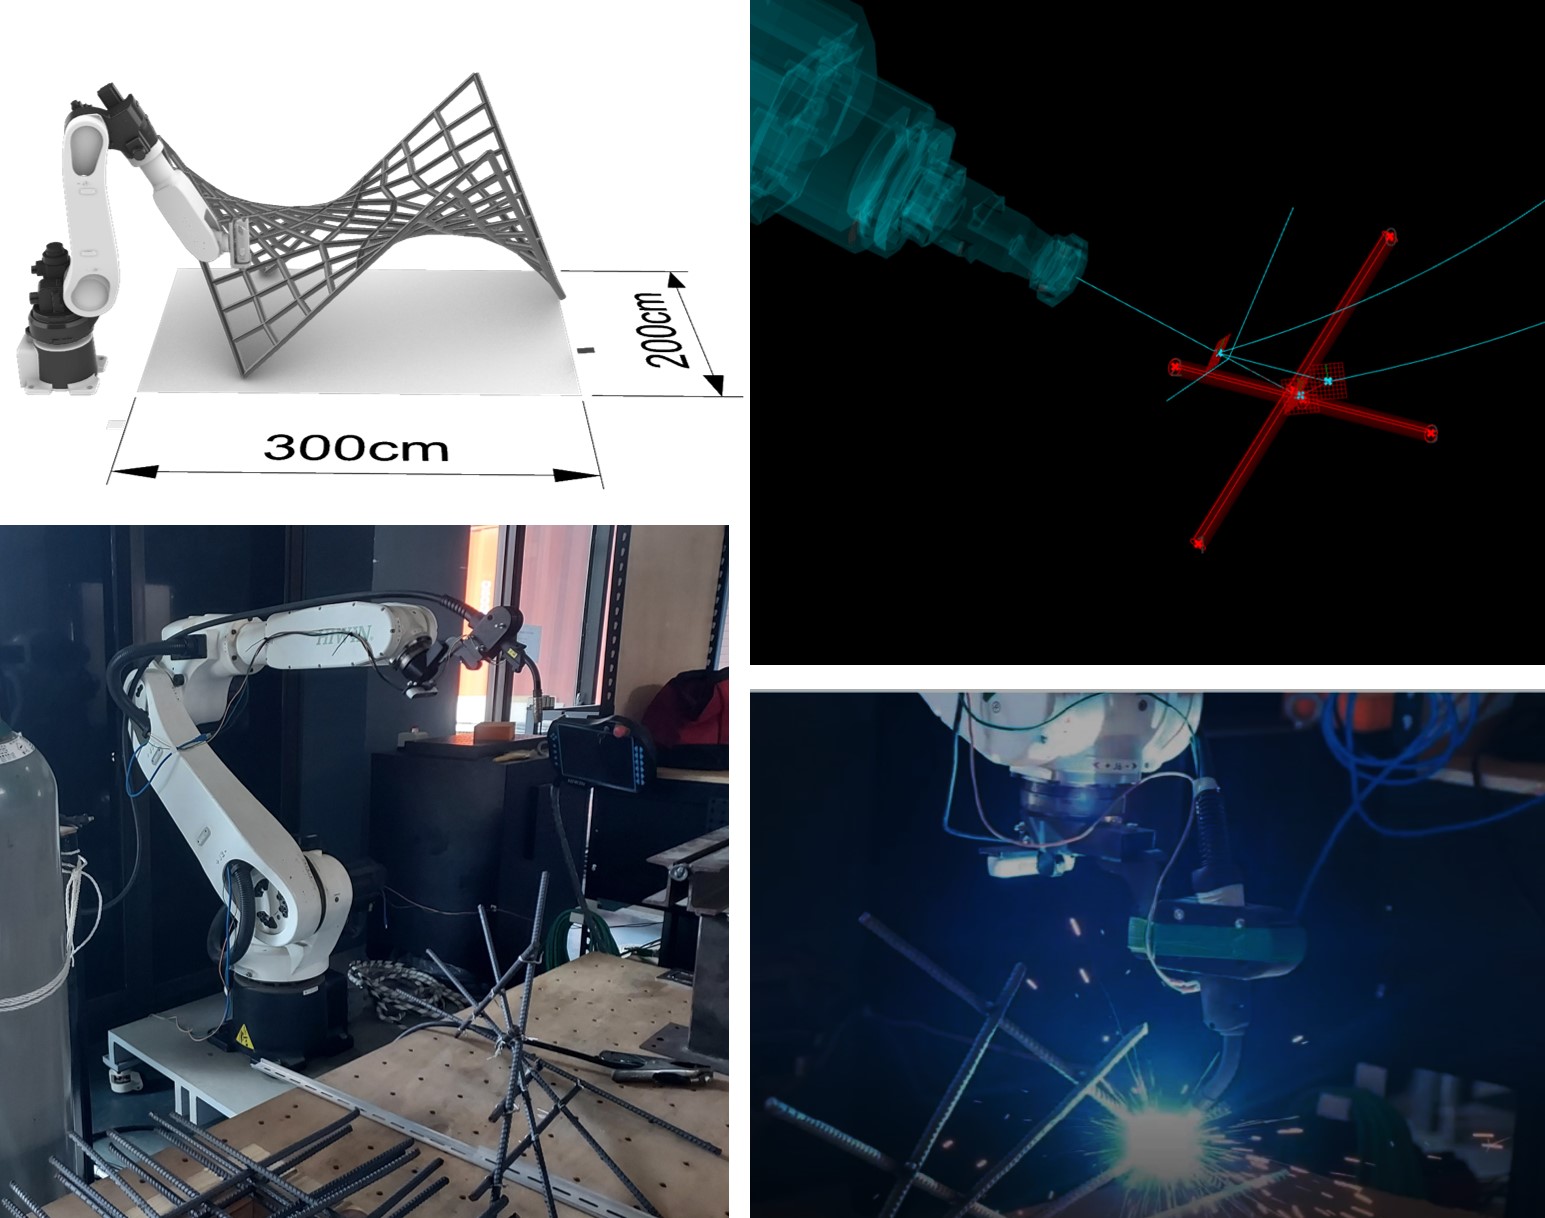 The Auto-welding Human-Robot Collaboration System Based on Computer Vision